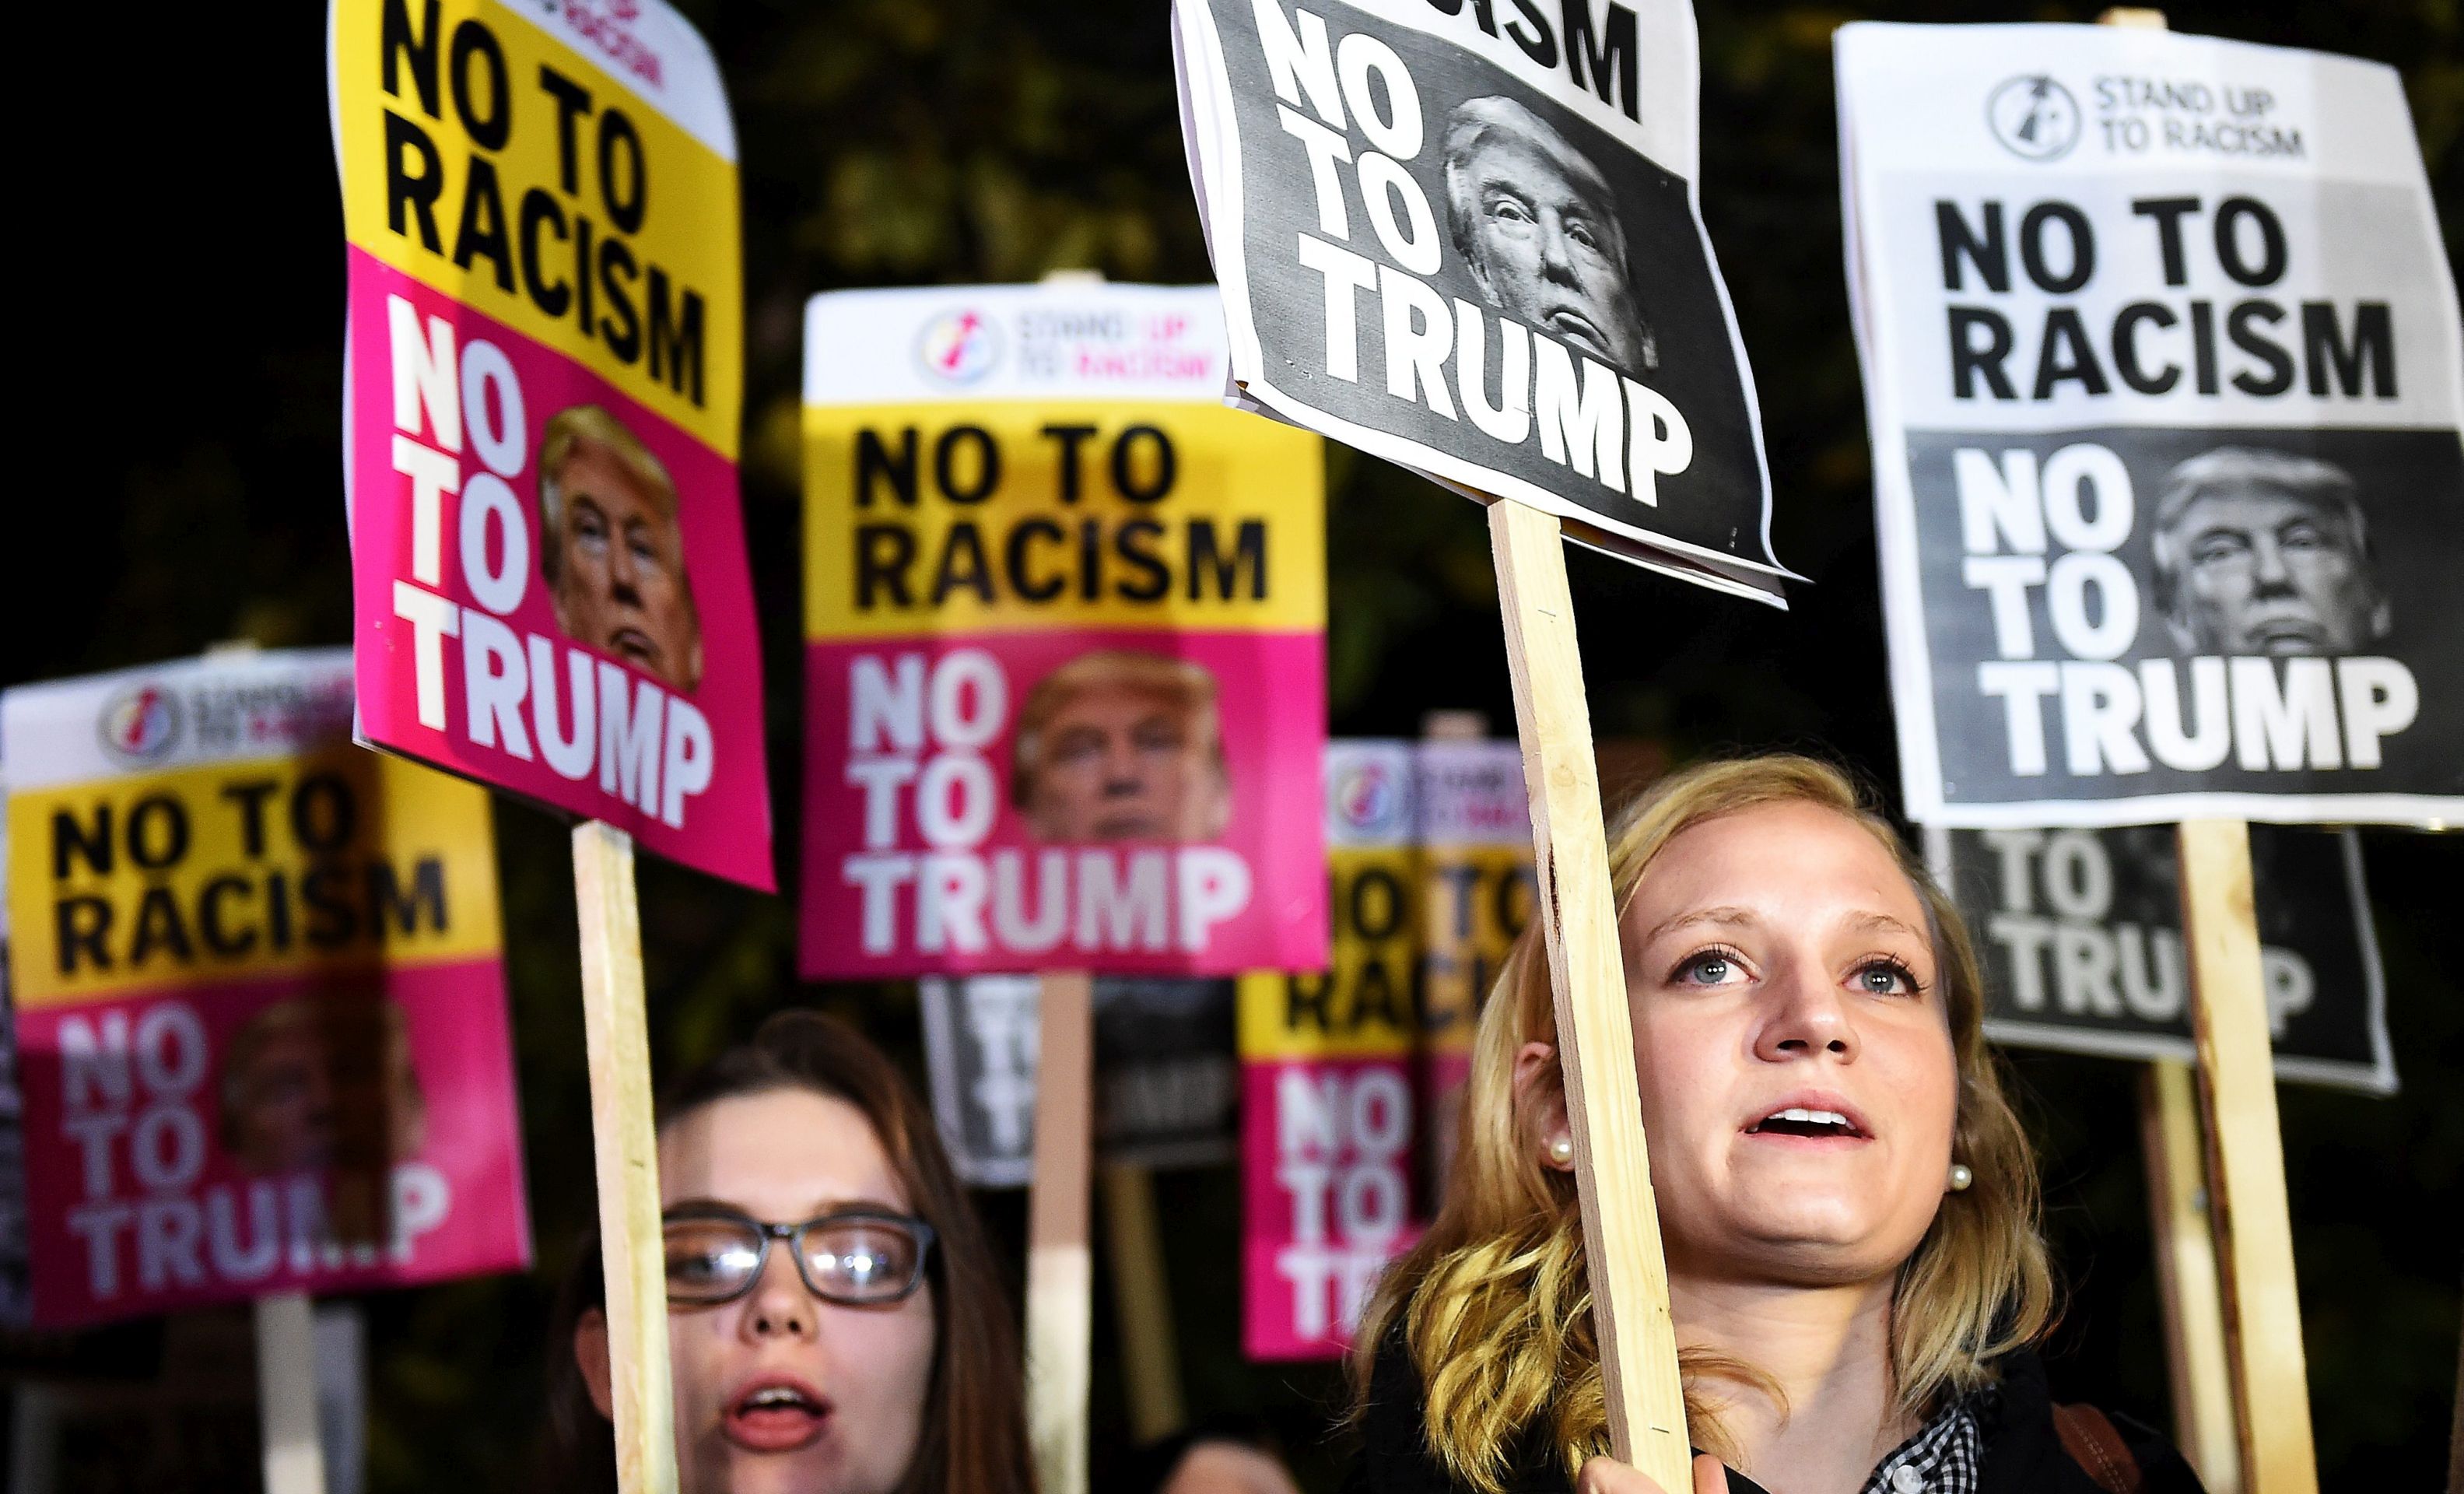 epa05624597 Anti Donald Trump protesters demonstrate outside the US Embassy in London, Britain, 09 November 2016. Donald Trump won the US presidential election against Democratic candidate Hillary Clinton, on 08 November.  EPA/ANDY RAIN